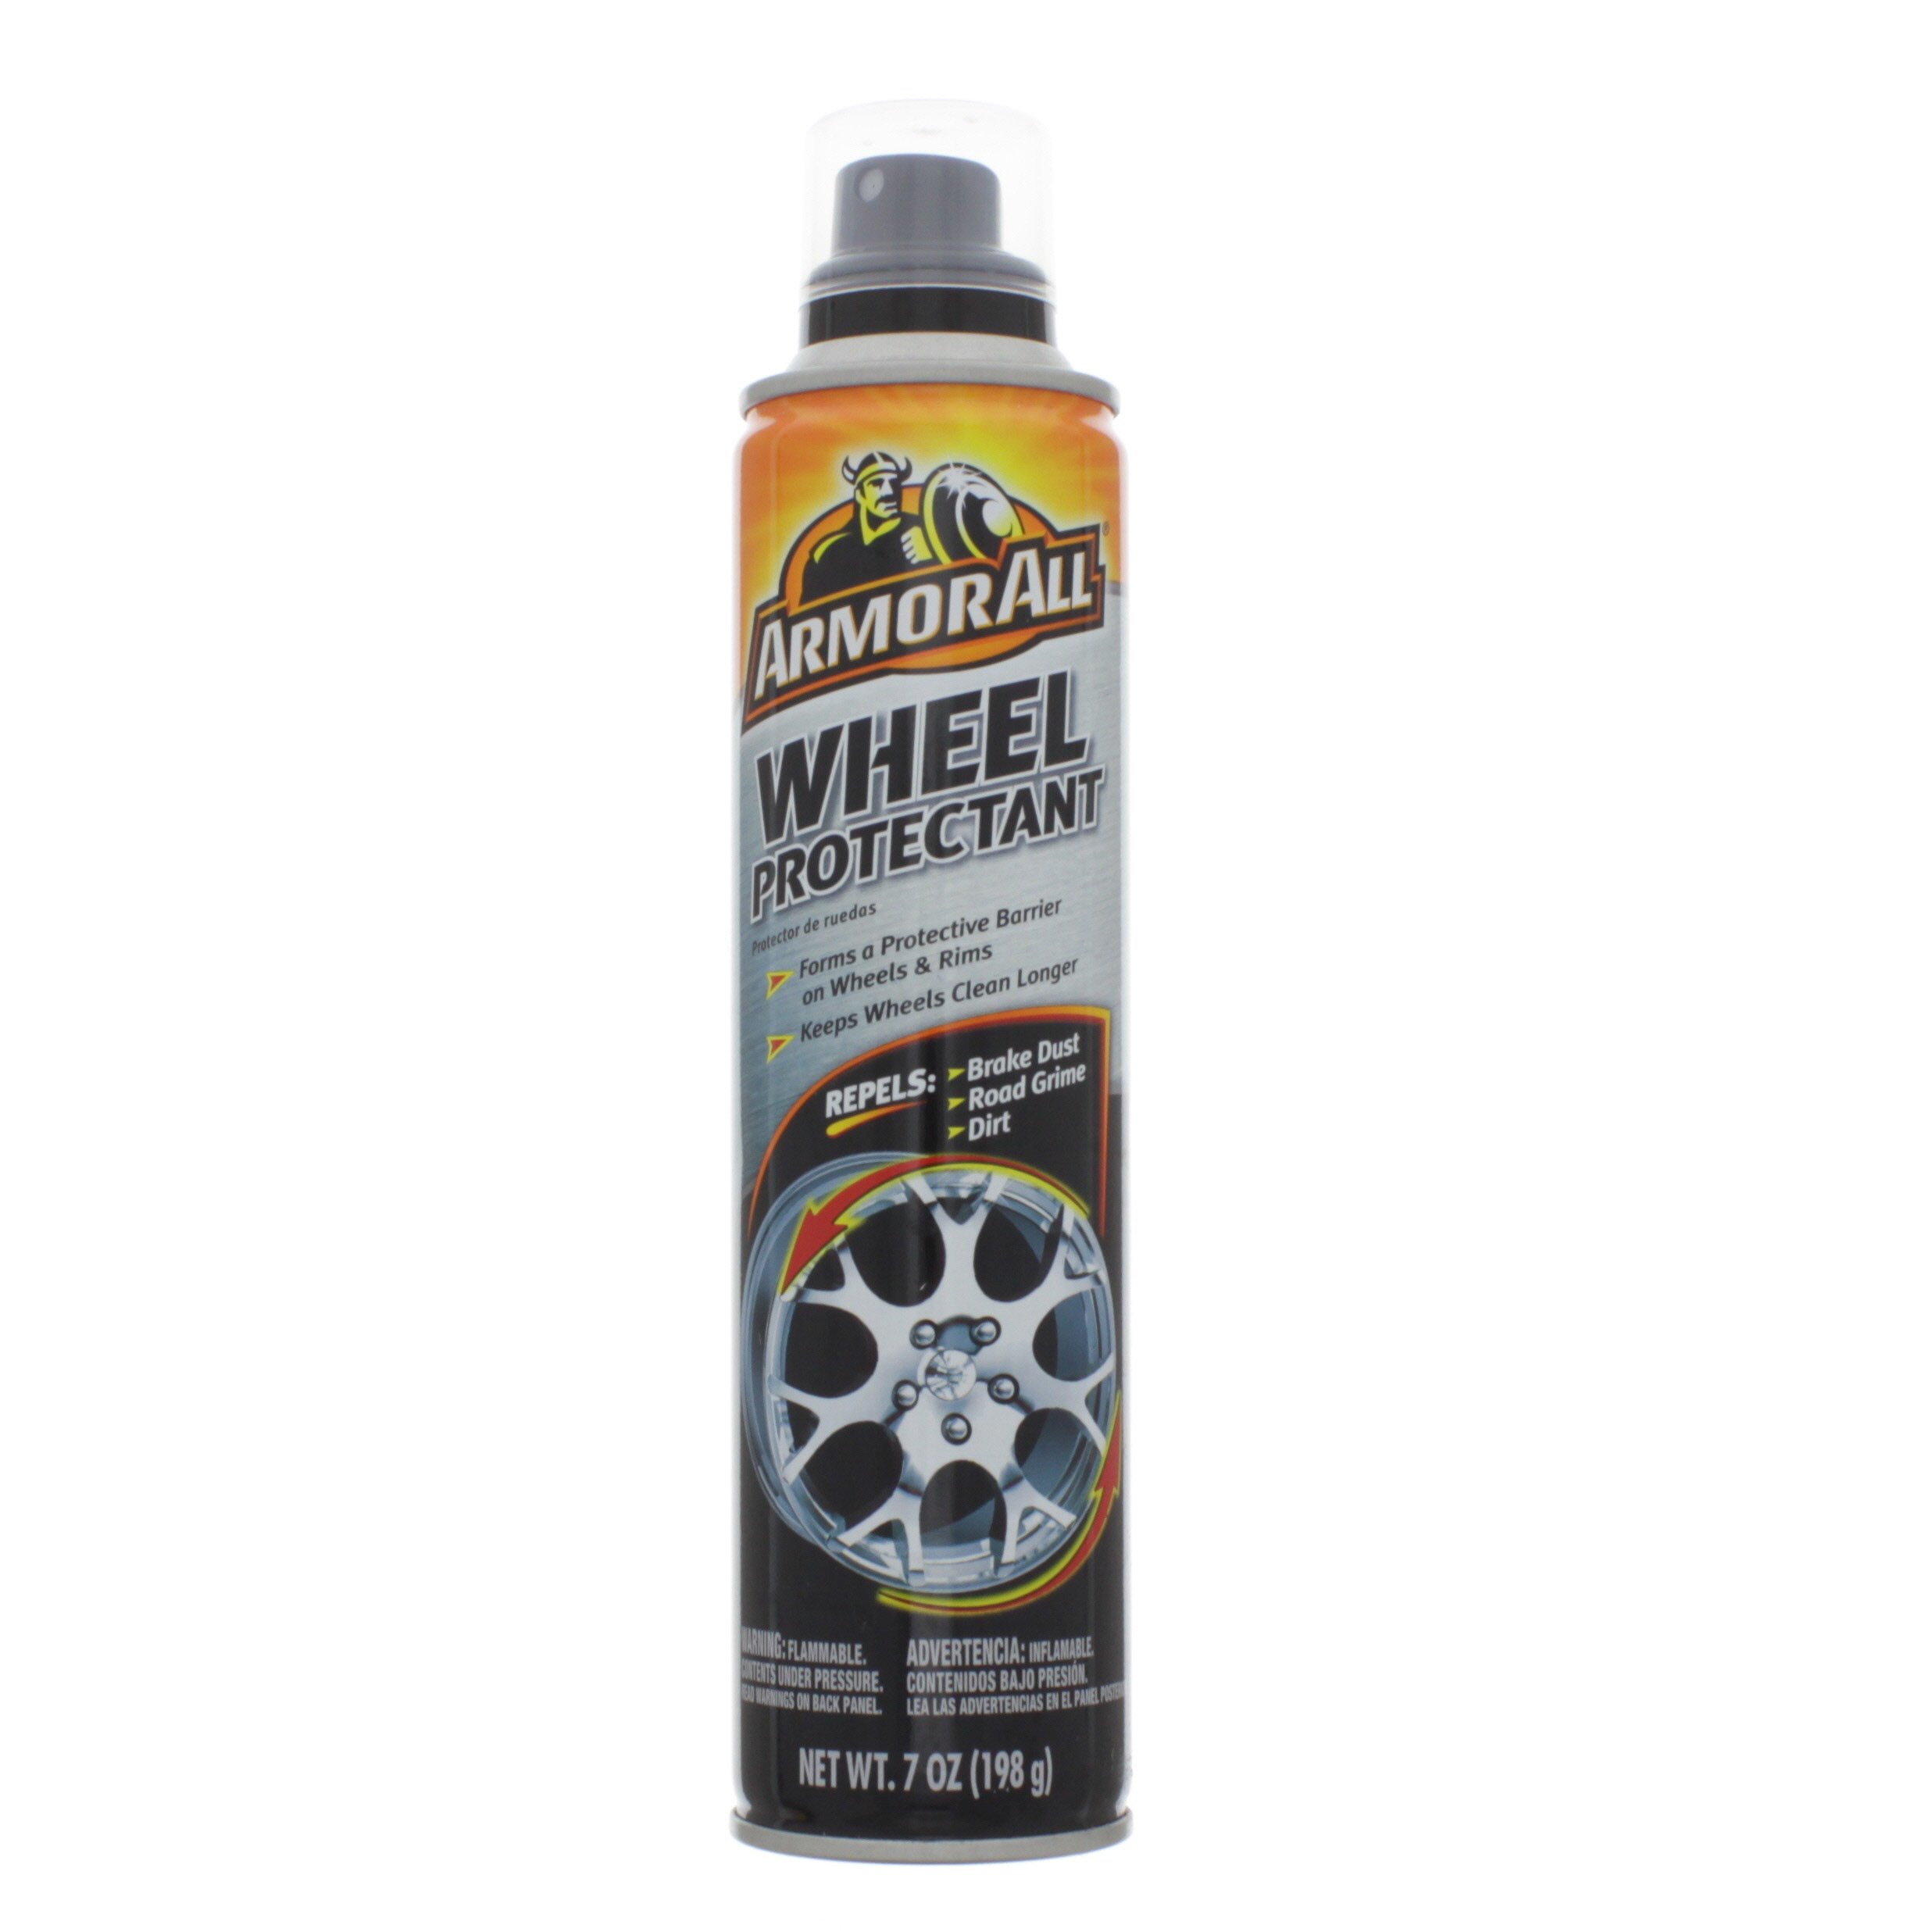 Armor All Extreme Tire Shine Aerosol - Shop Automotive Cleaners at H-E-B